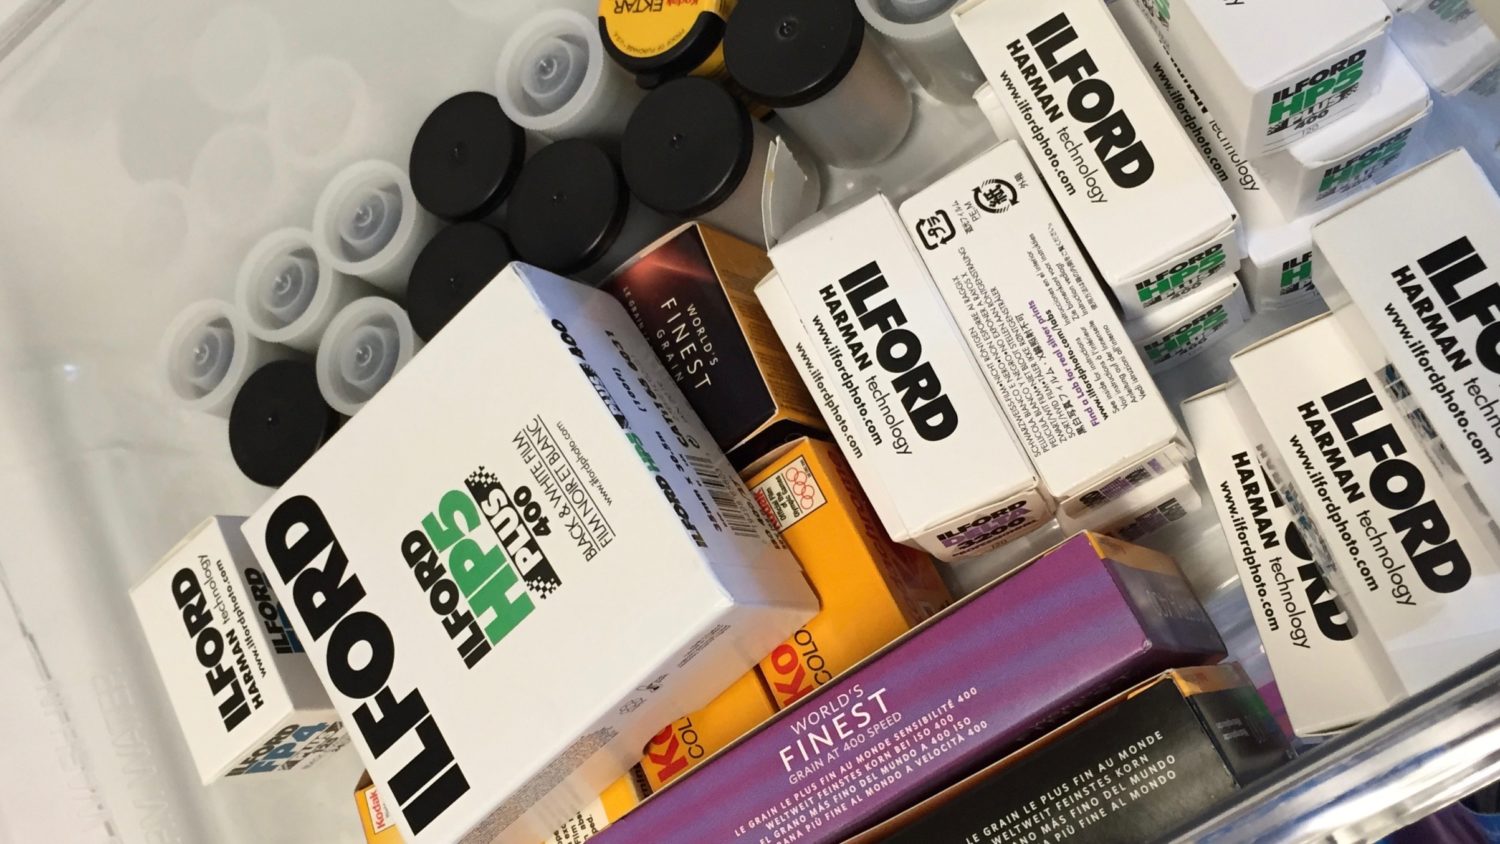 I keep my film in a lower drawer in my refrigerator. Right now I have a lot of Ilford HP5, some Kodak Portra, Ilford FP4, and Kodak Ektar.